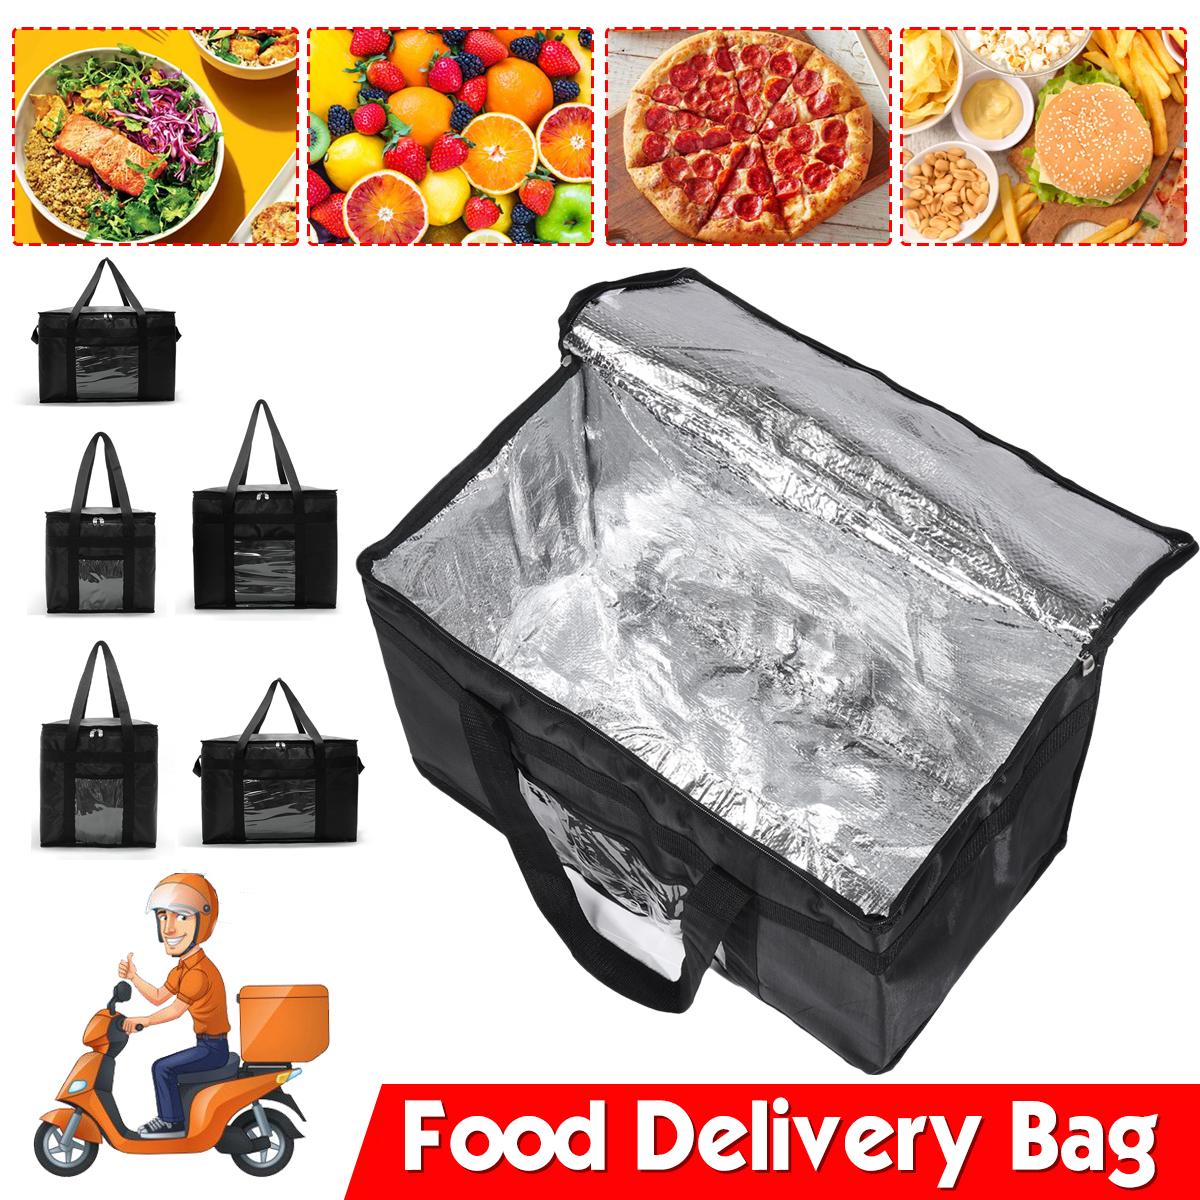 292348583514746L-Food-Delivery-Bag-Thermal-Insulated-Takeaway-Bag-Camping-Picnic-Bag-1742533-1